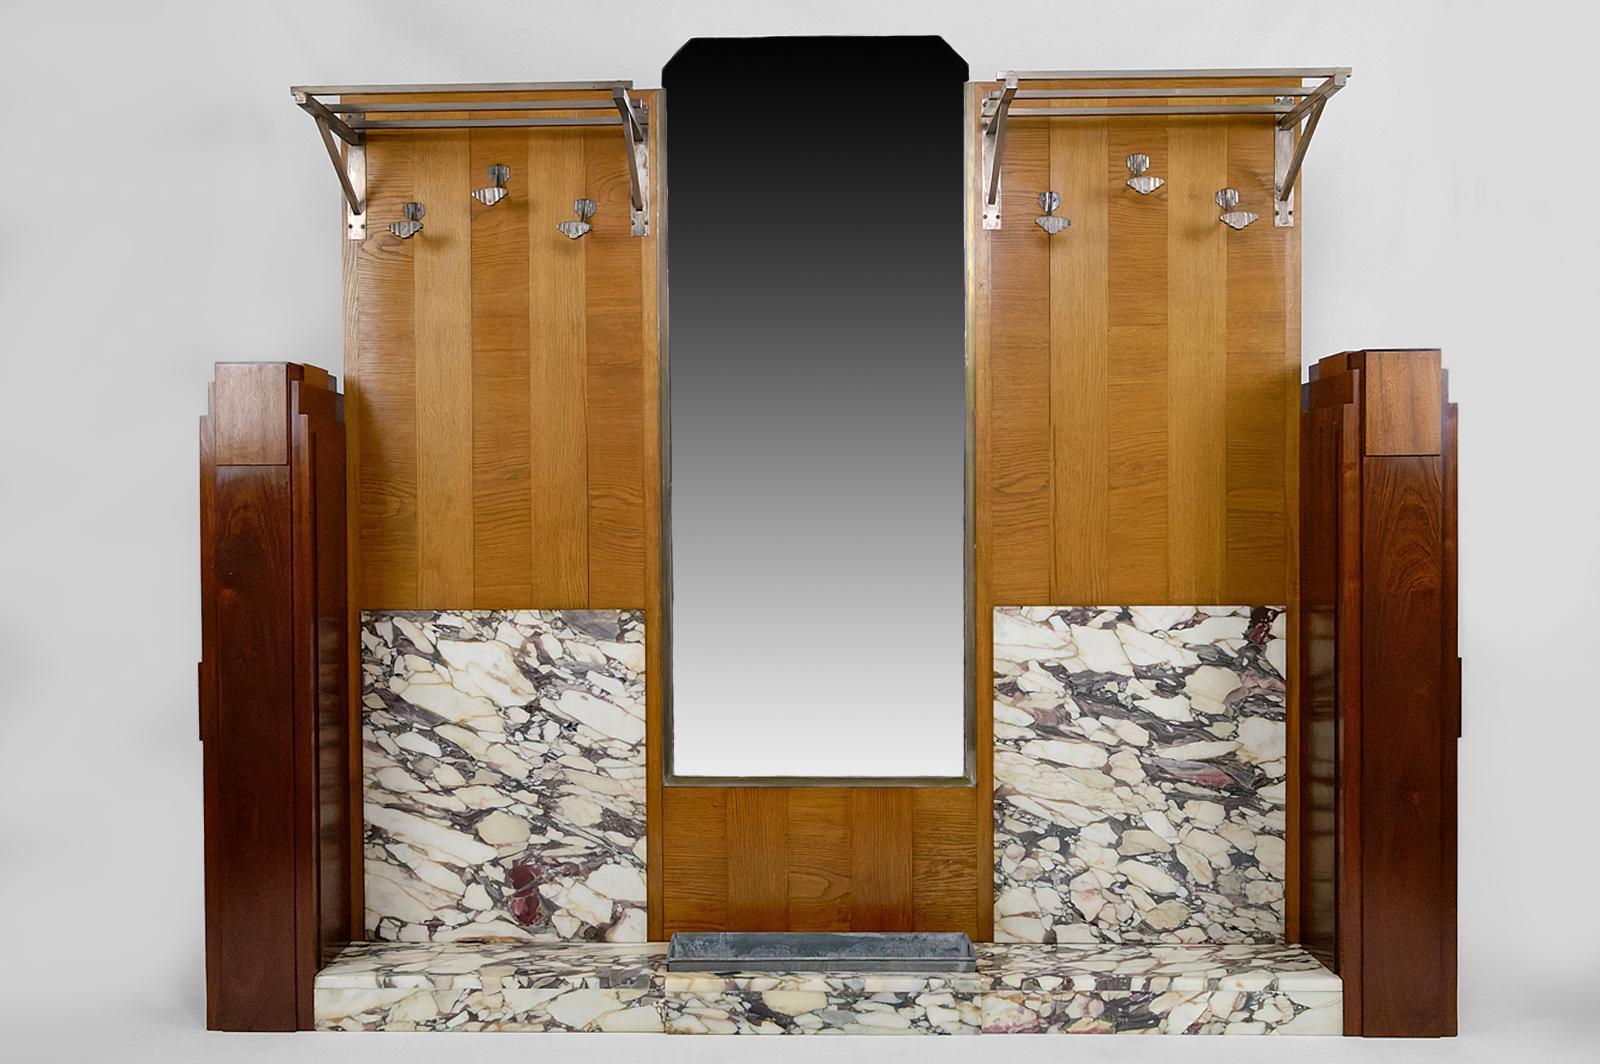 Important Art Deco hall cabinet / coat stand hatstand /hatrack / coat rack / coat stand /hall tree composed of:
- in the center, a large beveled mirror and a zinc tray;
- on each side, 2 hat racks and 3 hooks fixed on veneered oak panels, on a